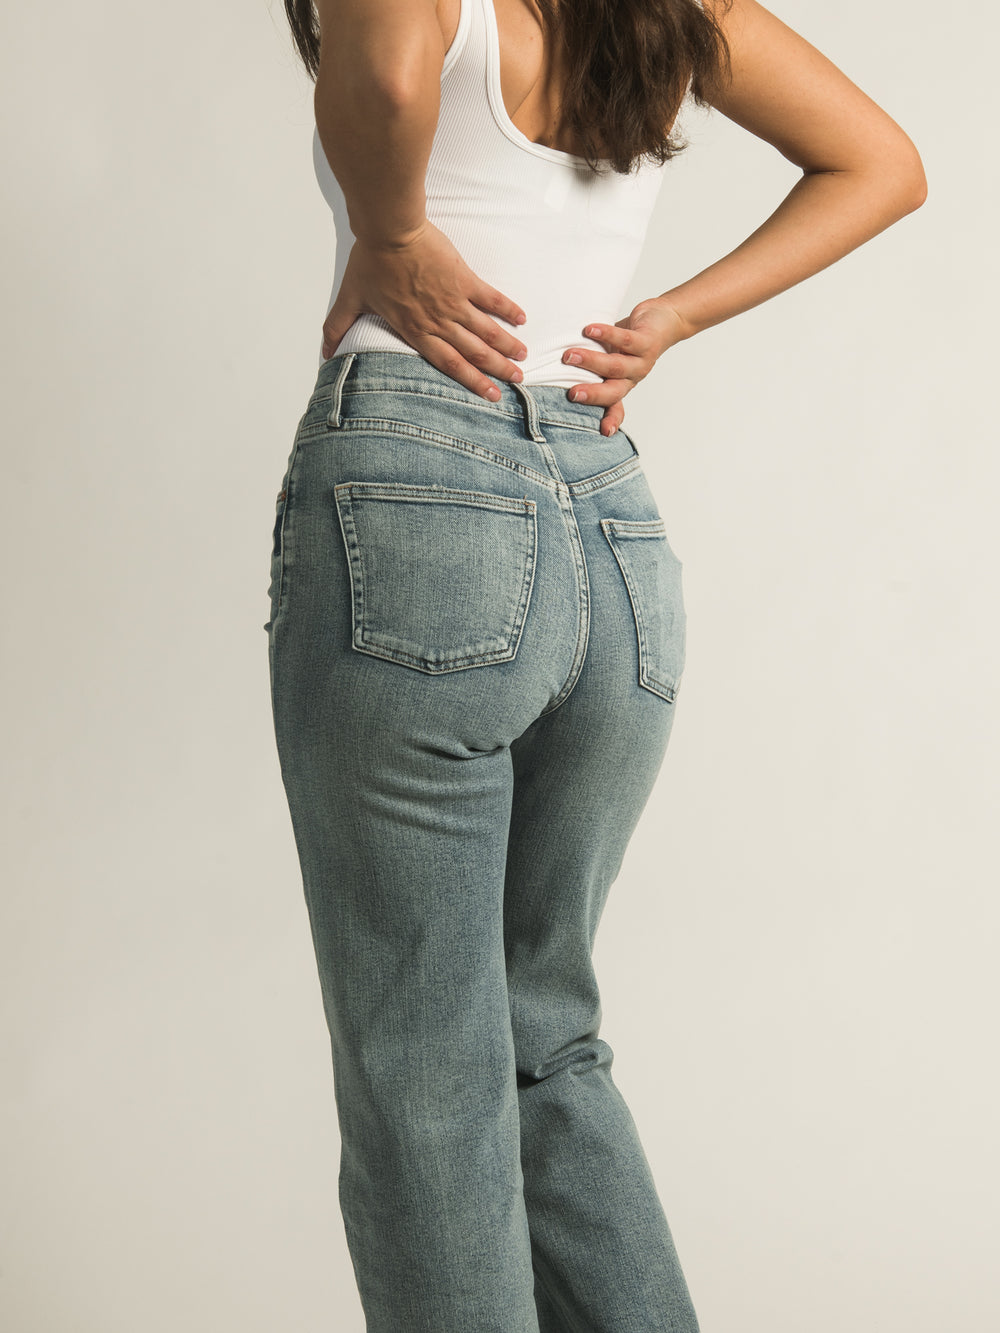 SILVER JEANS 31" HIGH RISE HIGHLY DESIRABLE - CLEARANCE